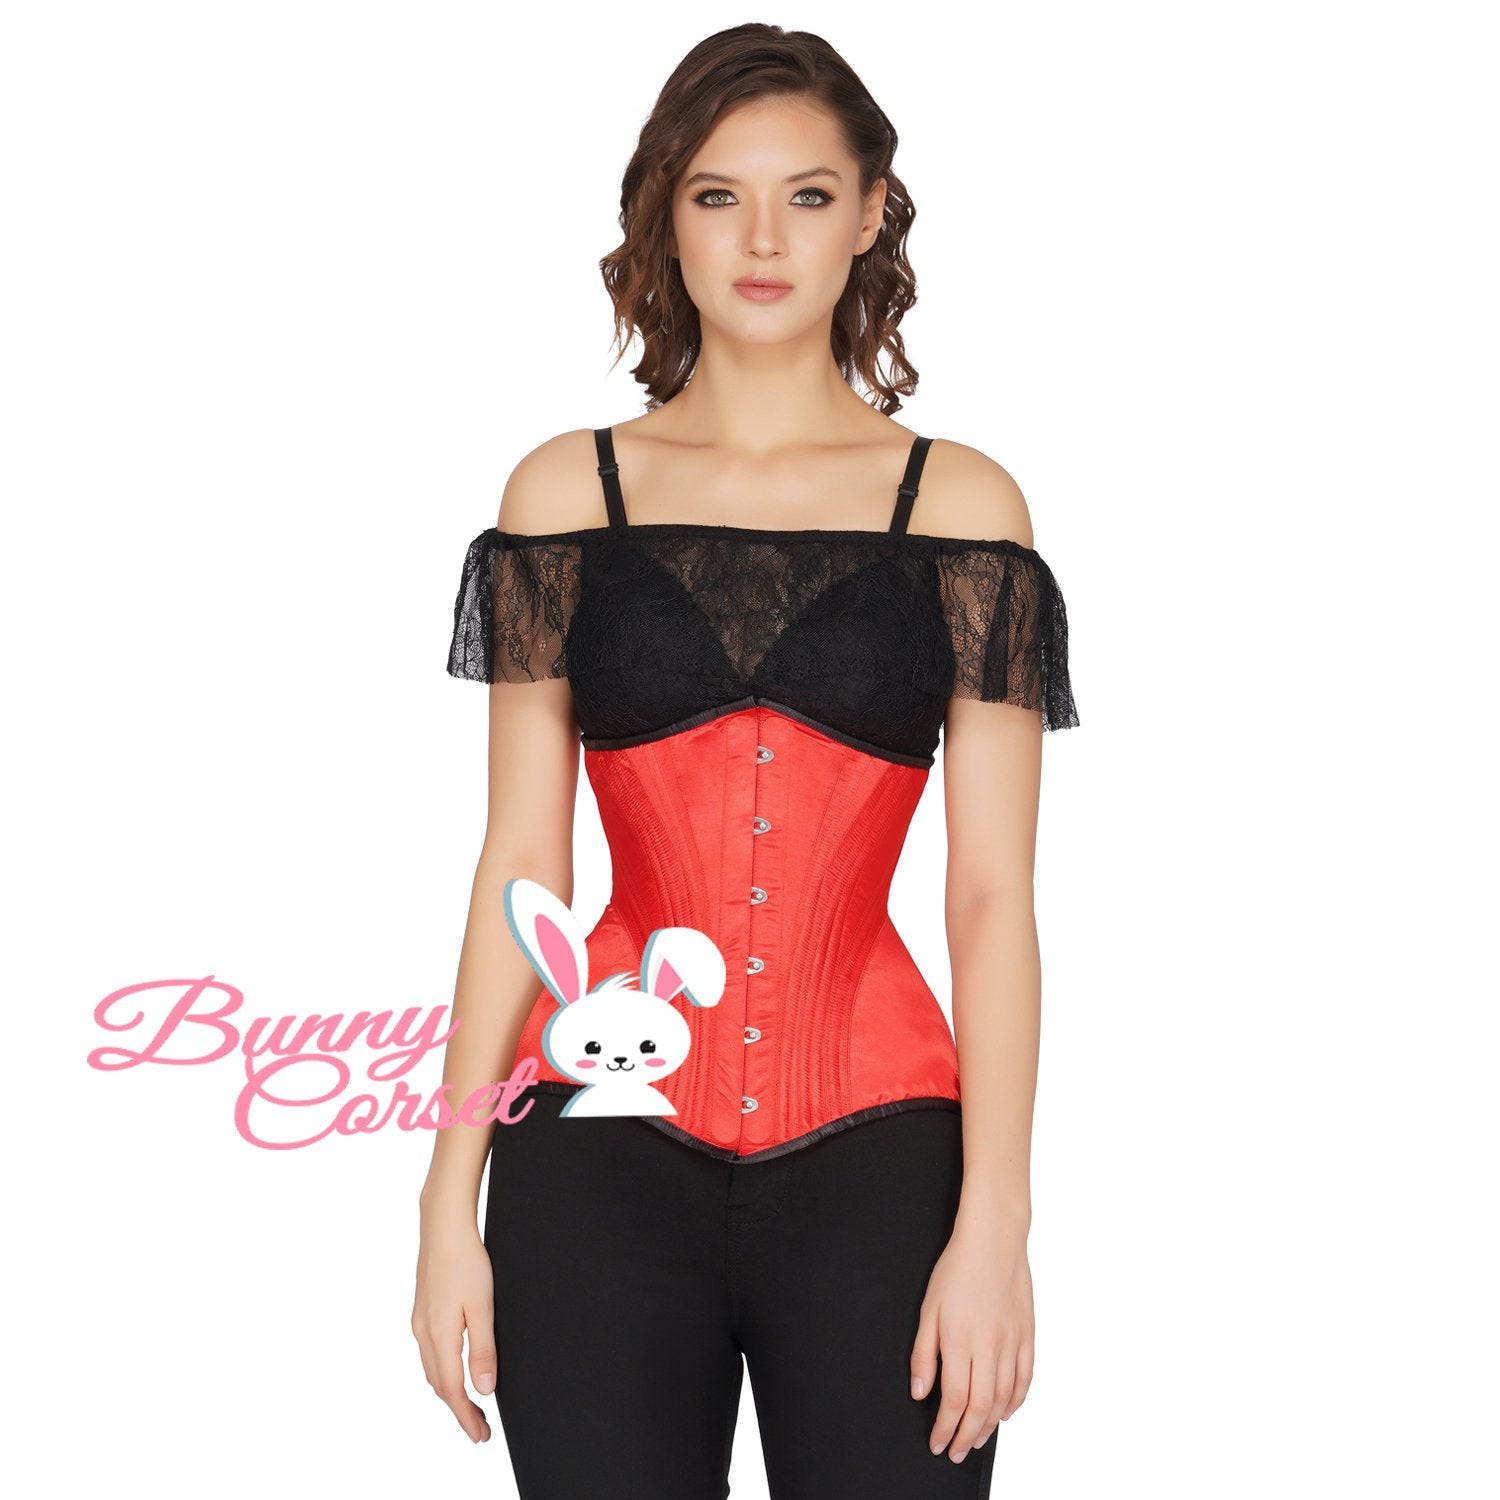 Should You Exercise in a Waist Training Corset? – Bunny Corset